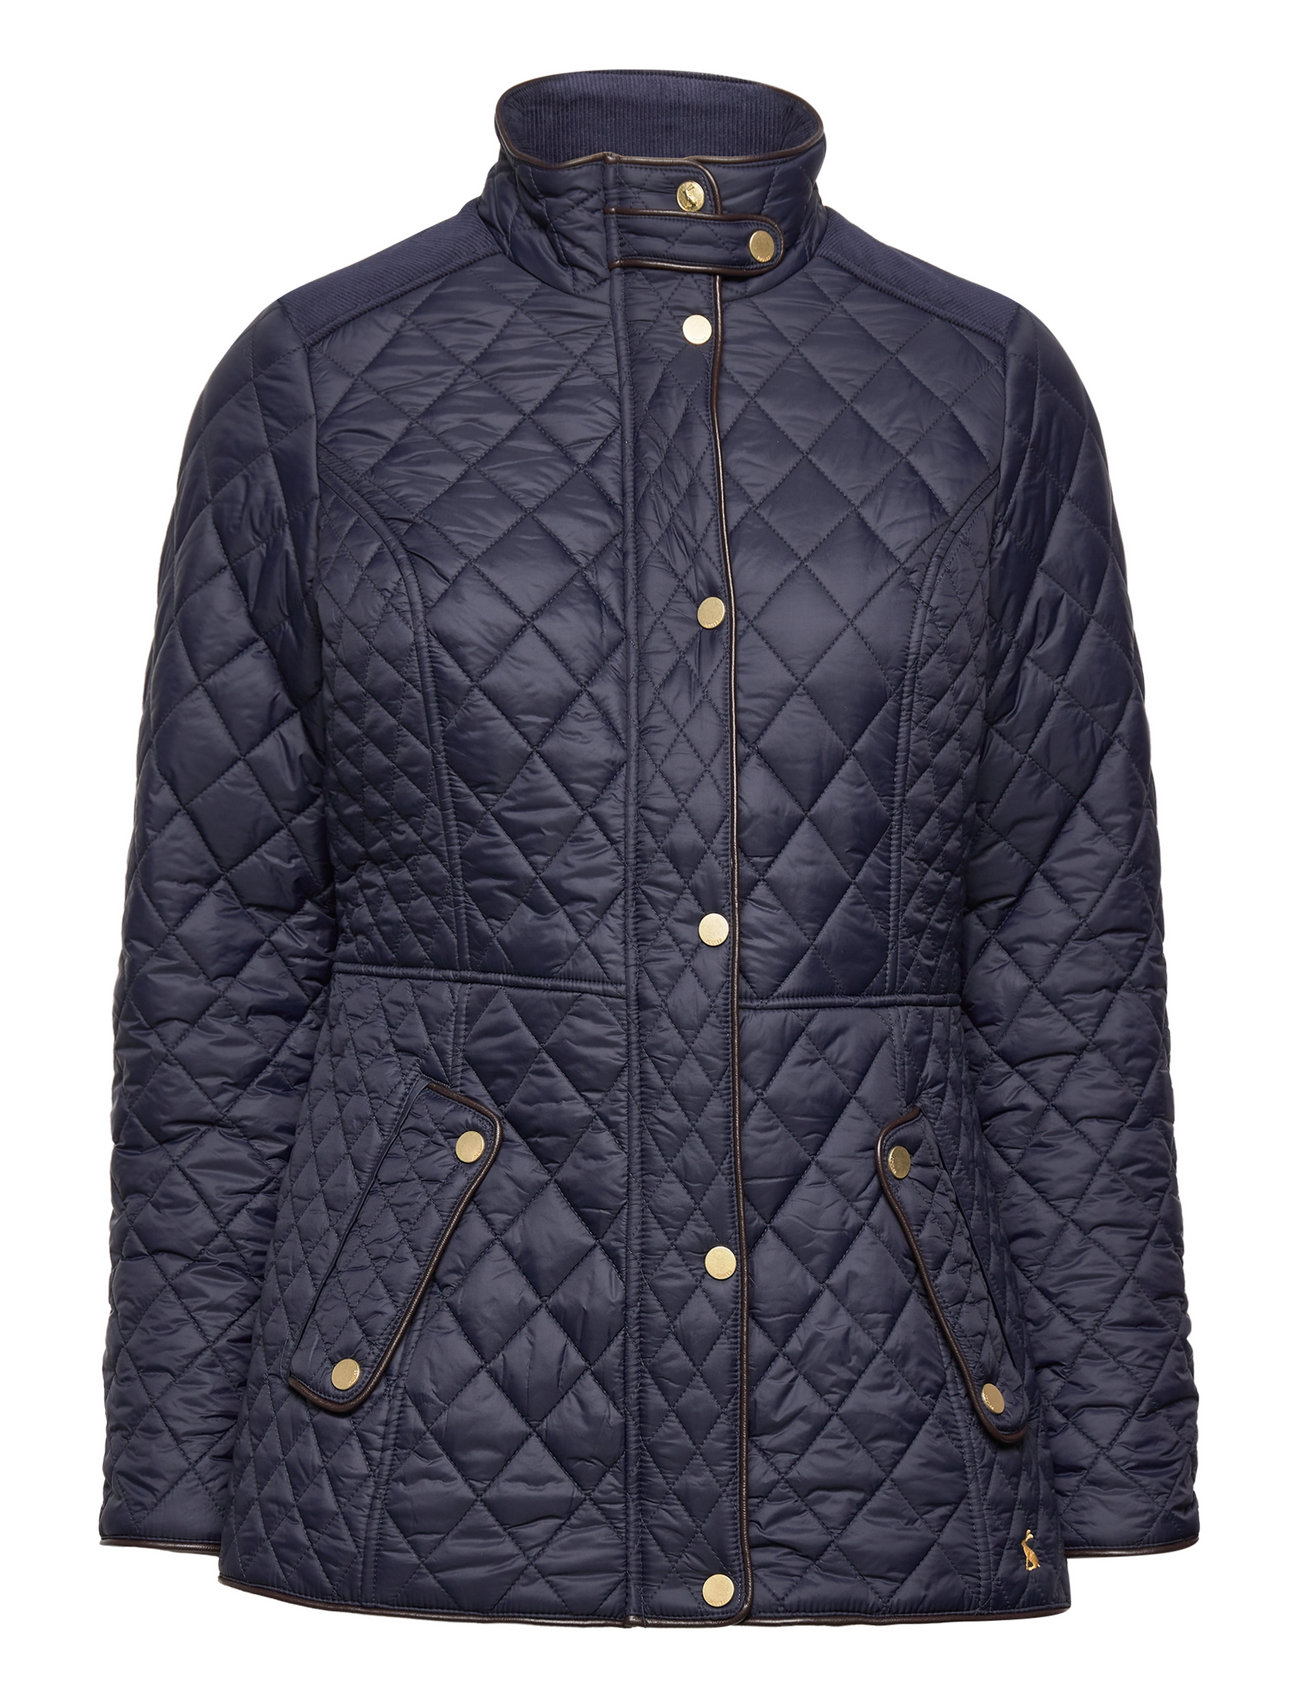 Joules Newdale - 129.95 €. Buy Quilted jackets from Joules online at ...